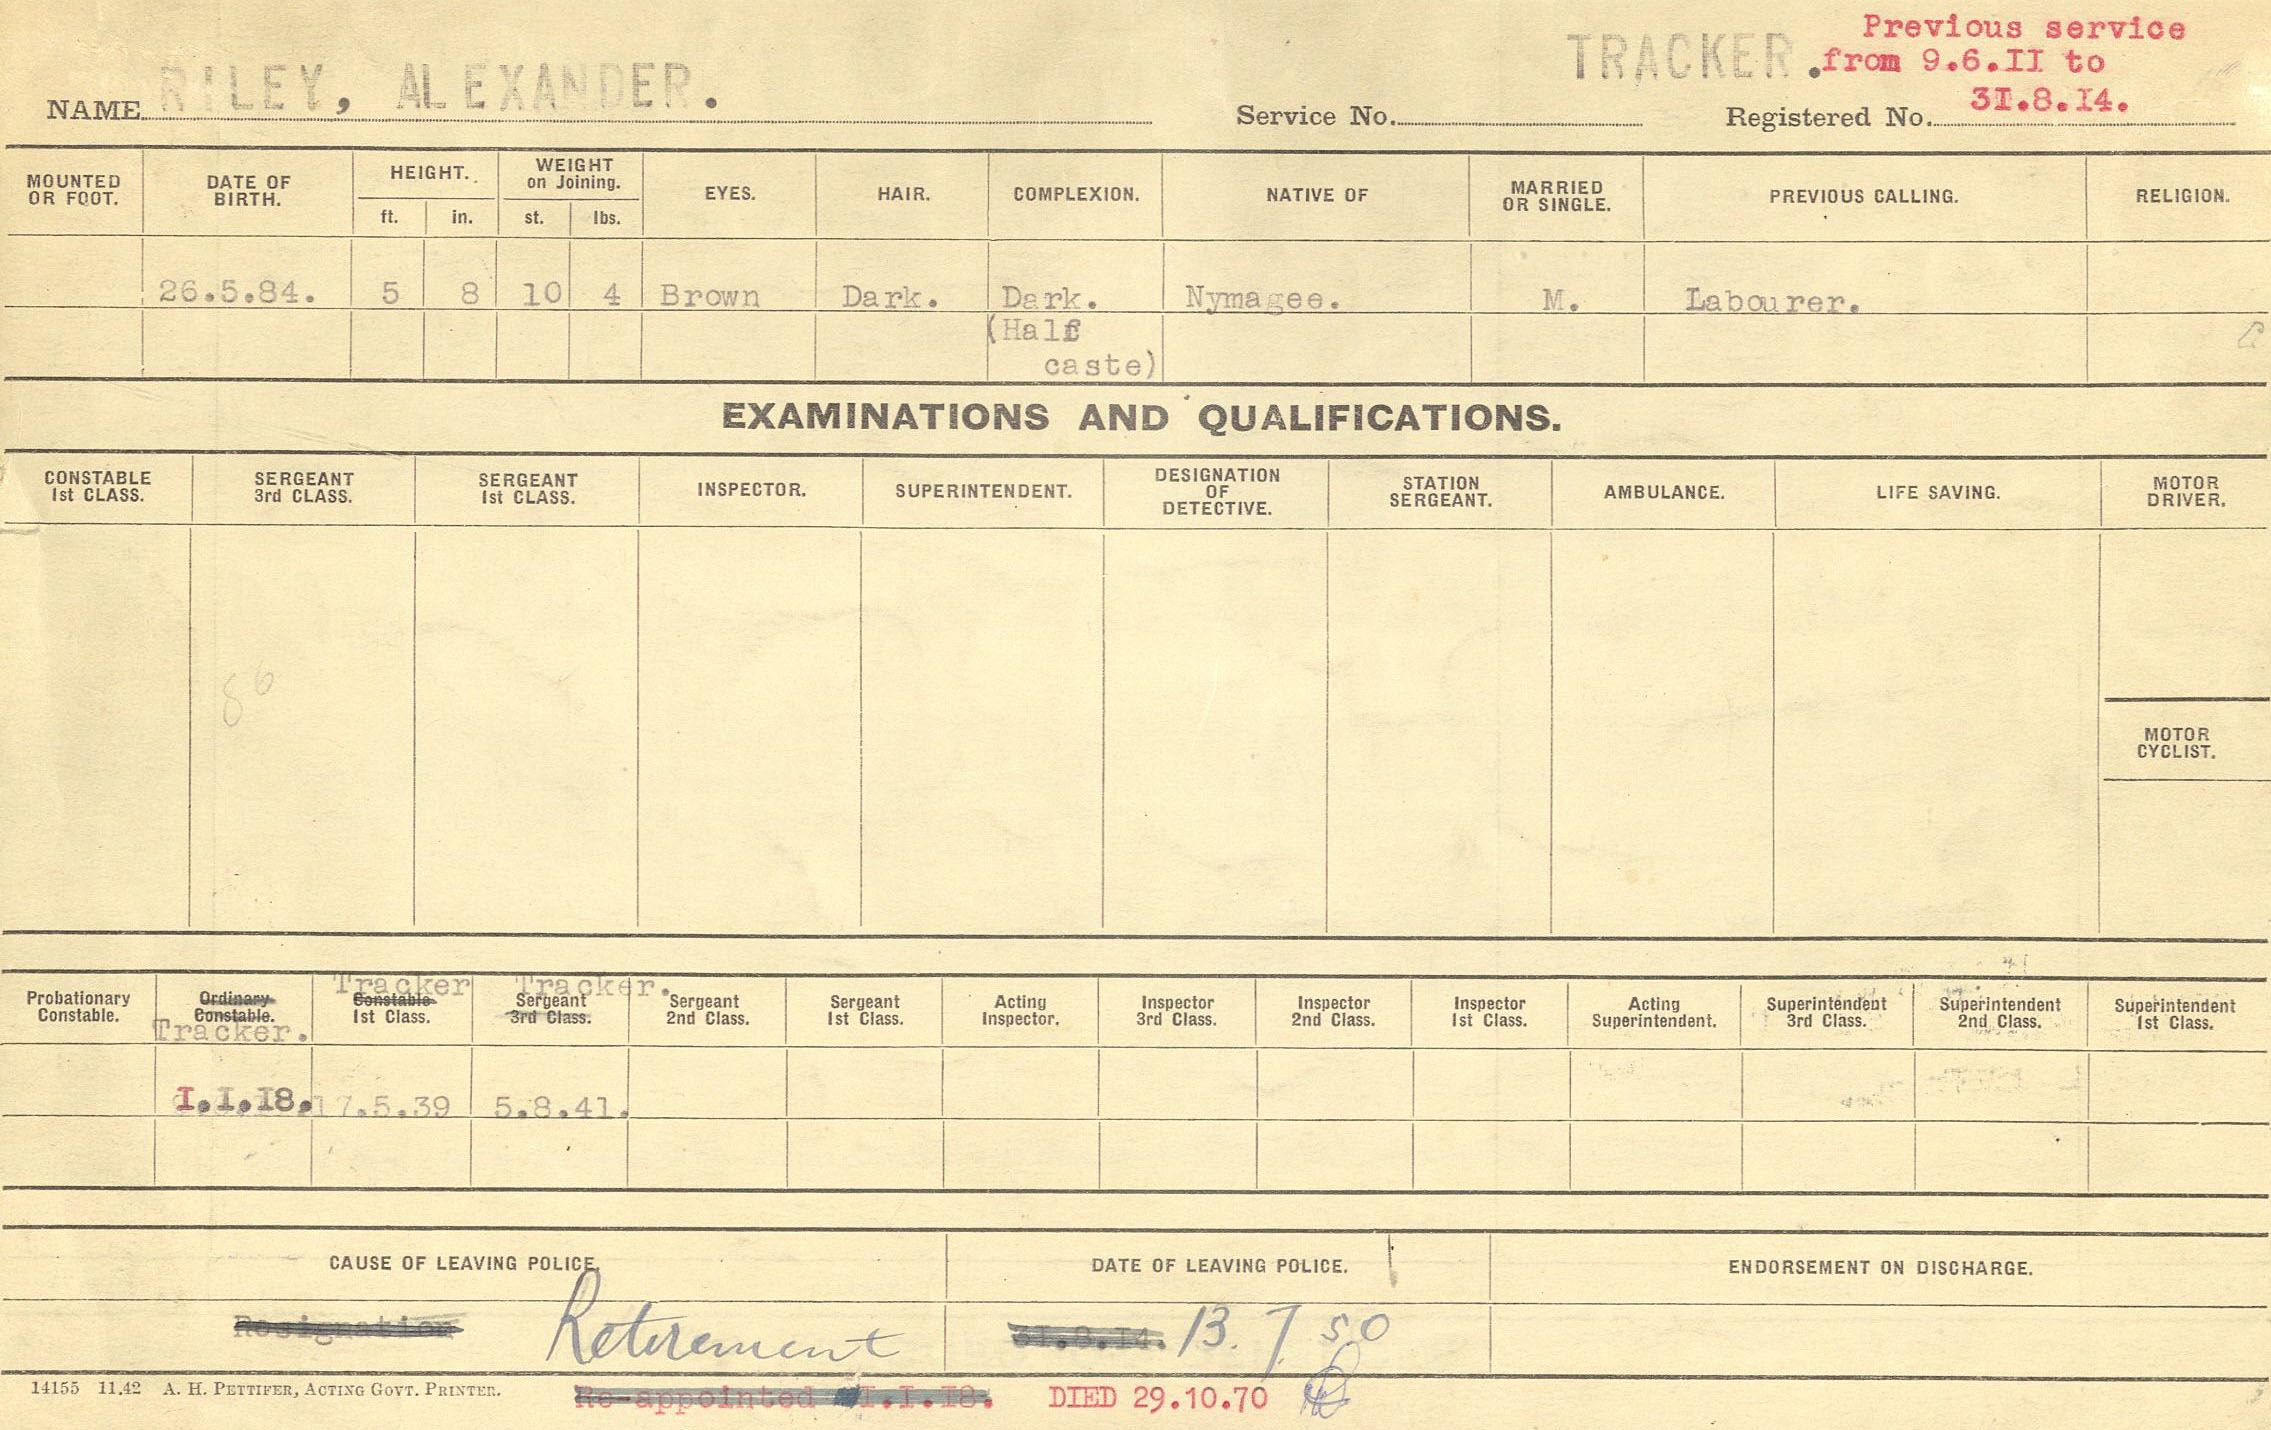 NSW Police staff service card for Alexander Riley